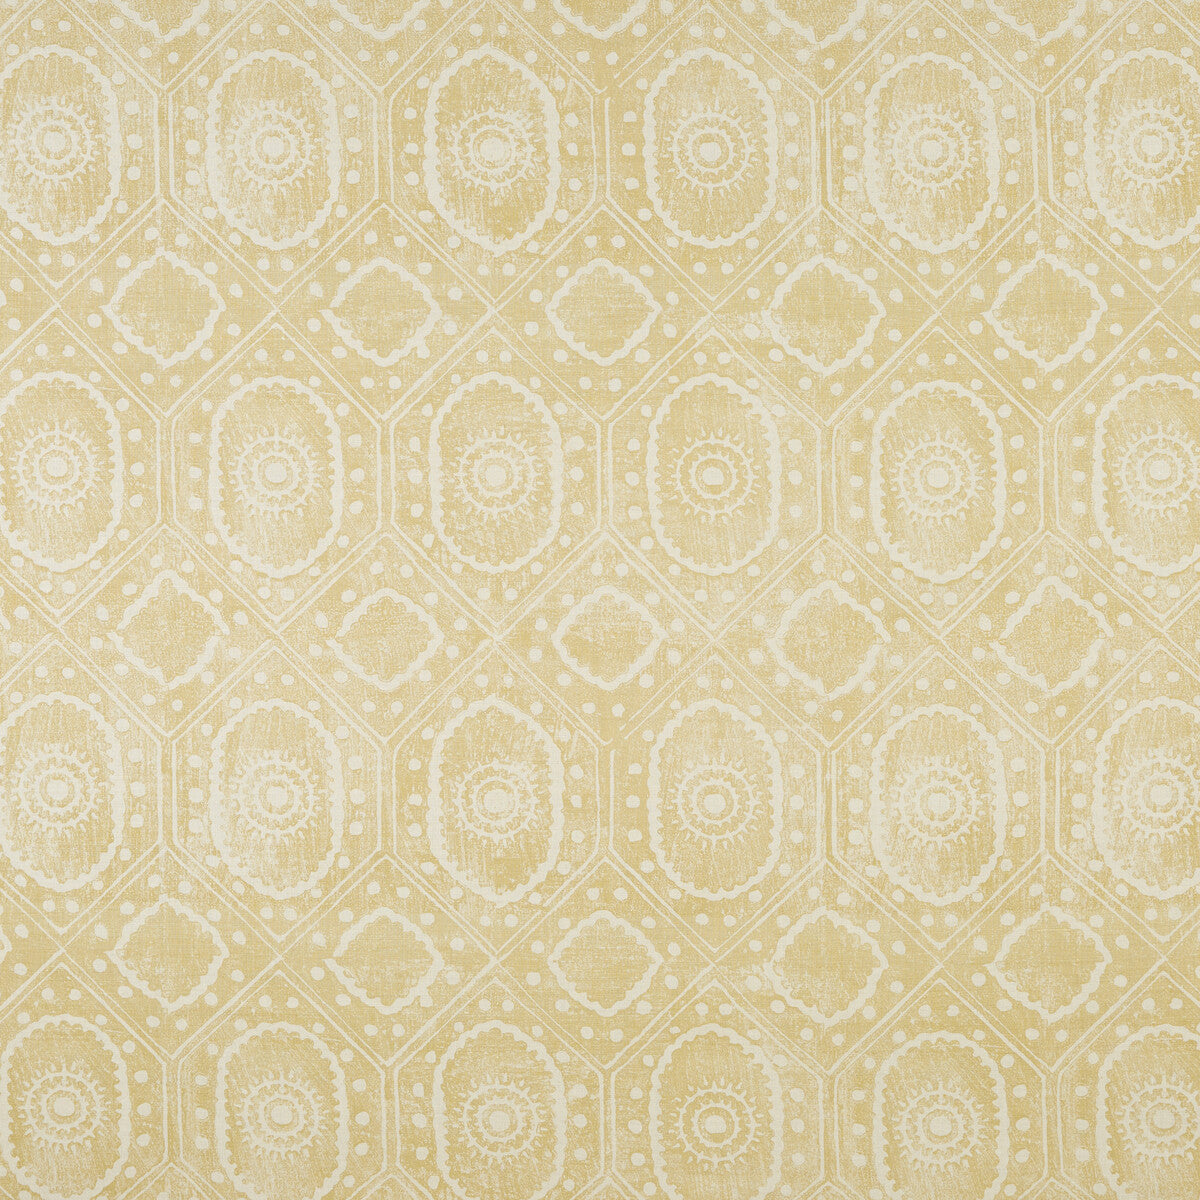 Diamond fabric in gold color - pattern BFC-3643.4.0 - by Lee Jofa in the Blithfield collection